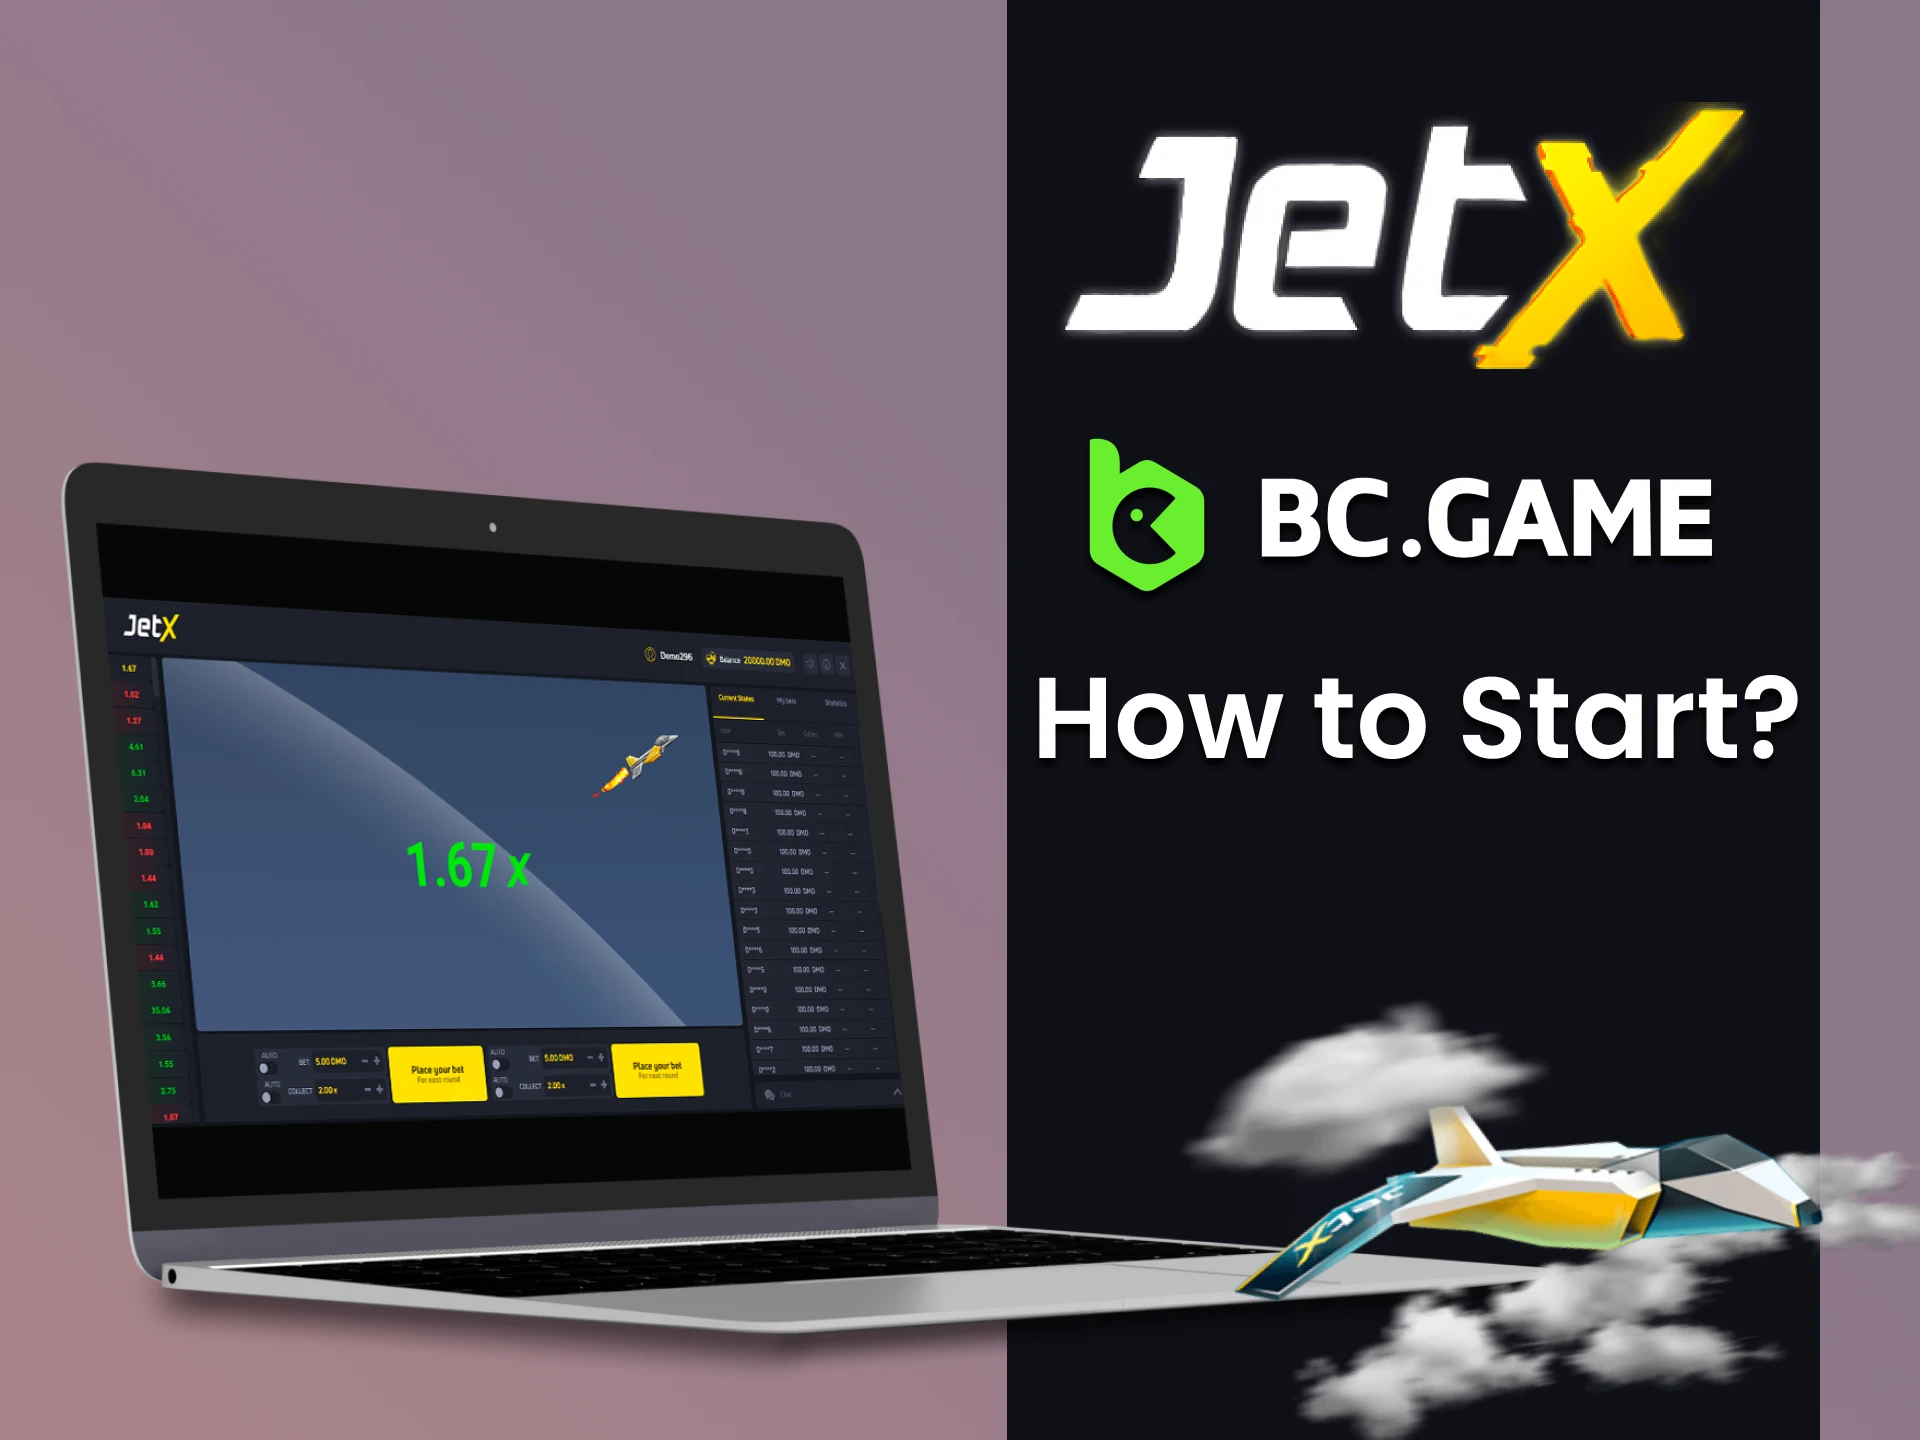 Go to the games section of BC Game to play JetX.